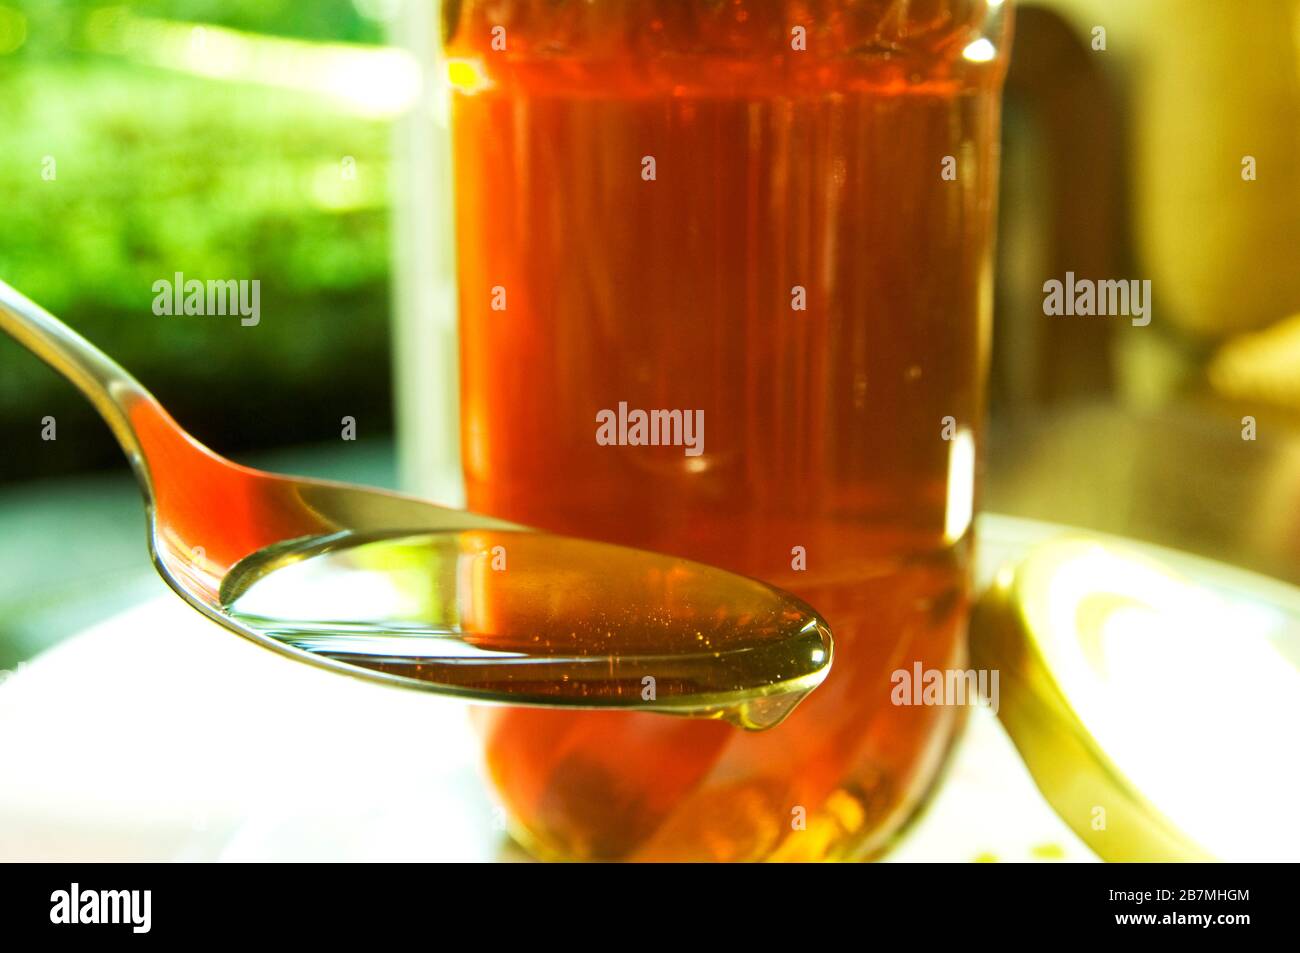 Honey is a sweet, viscous food made by honey bees. It is both healthy and delicious. Stock Photo